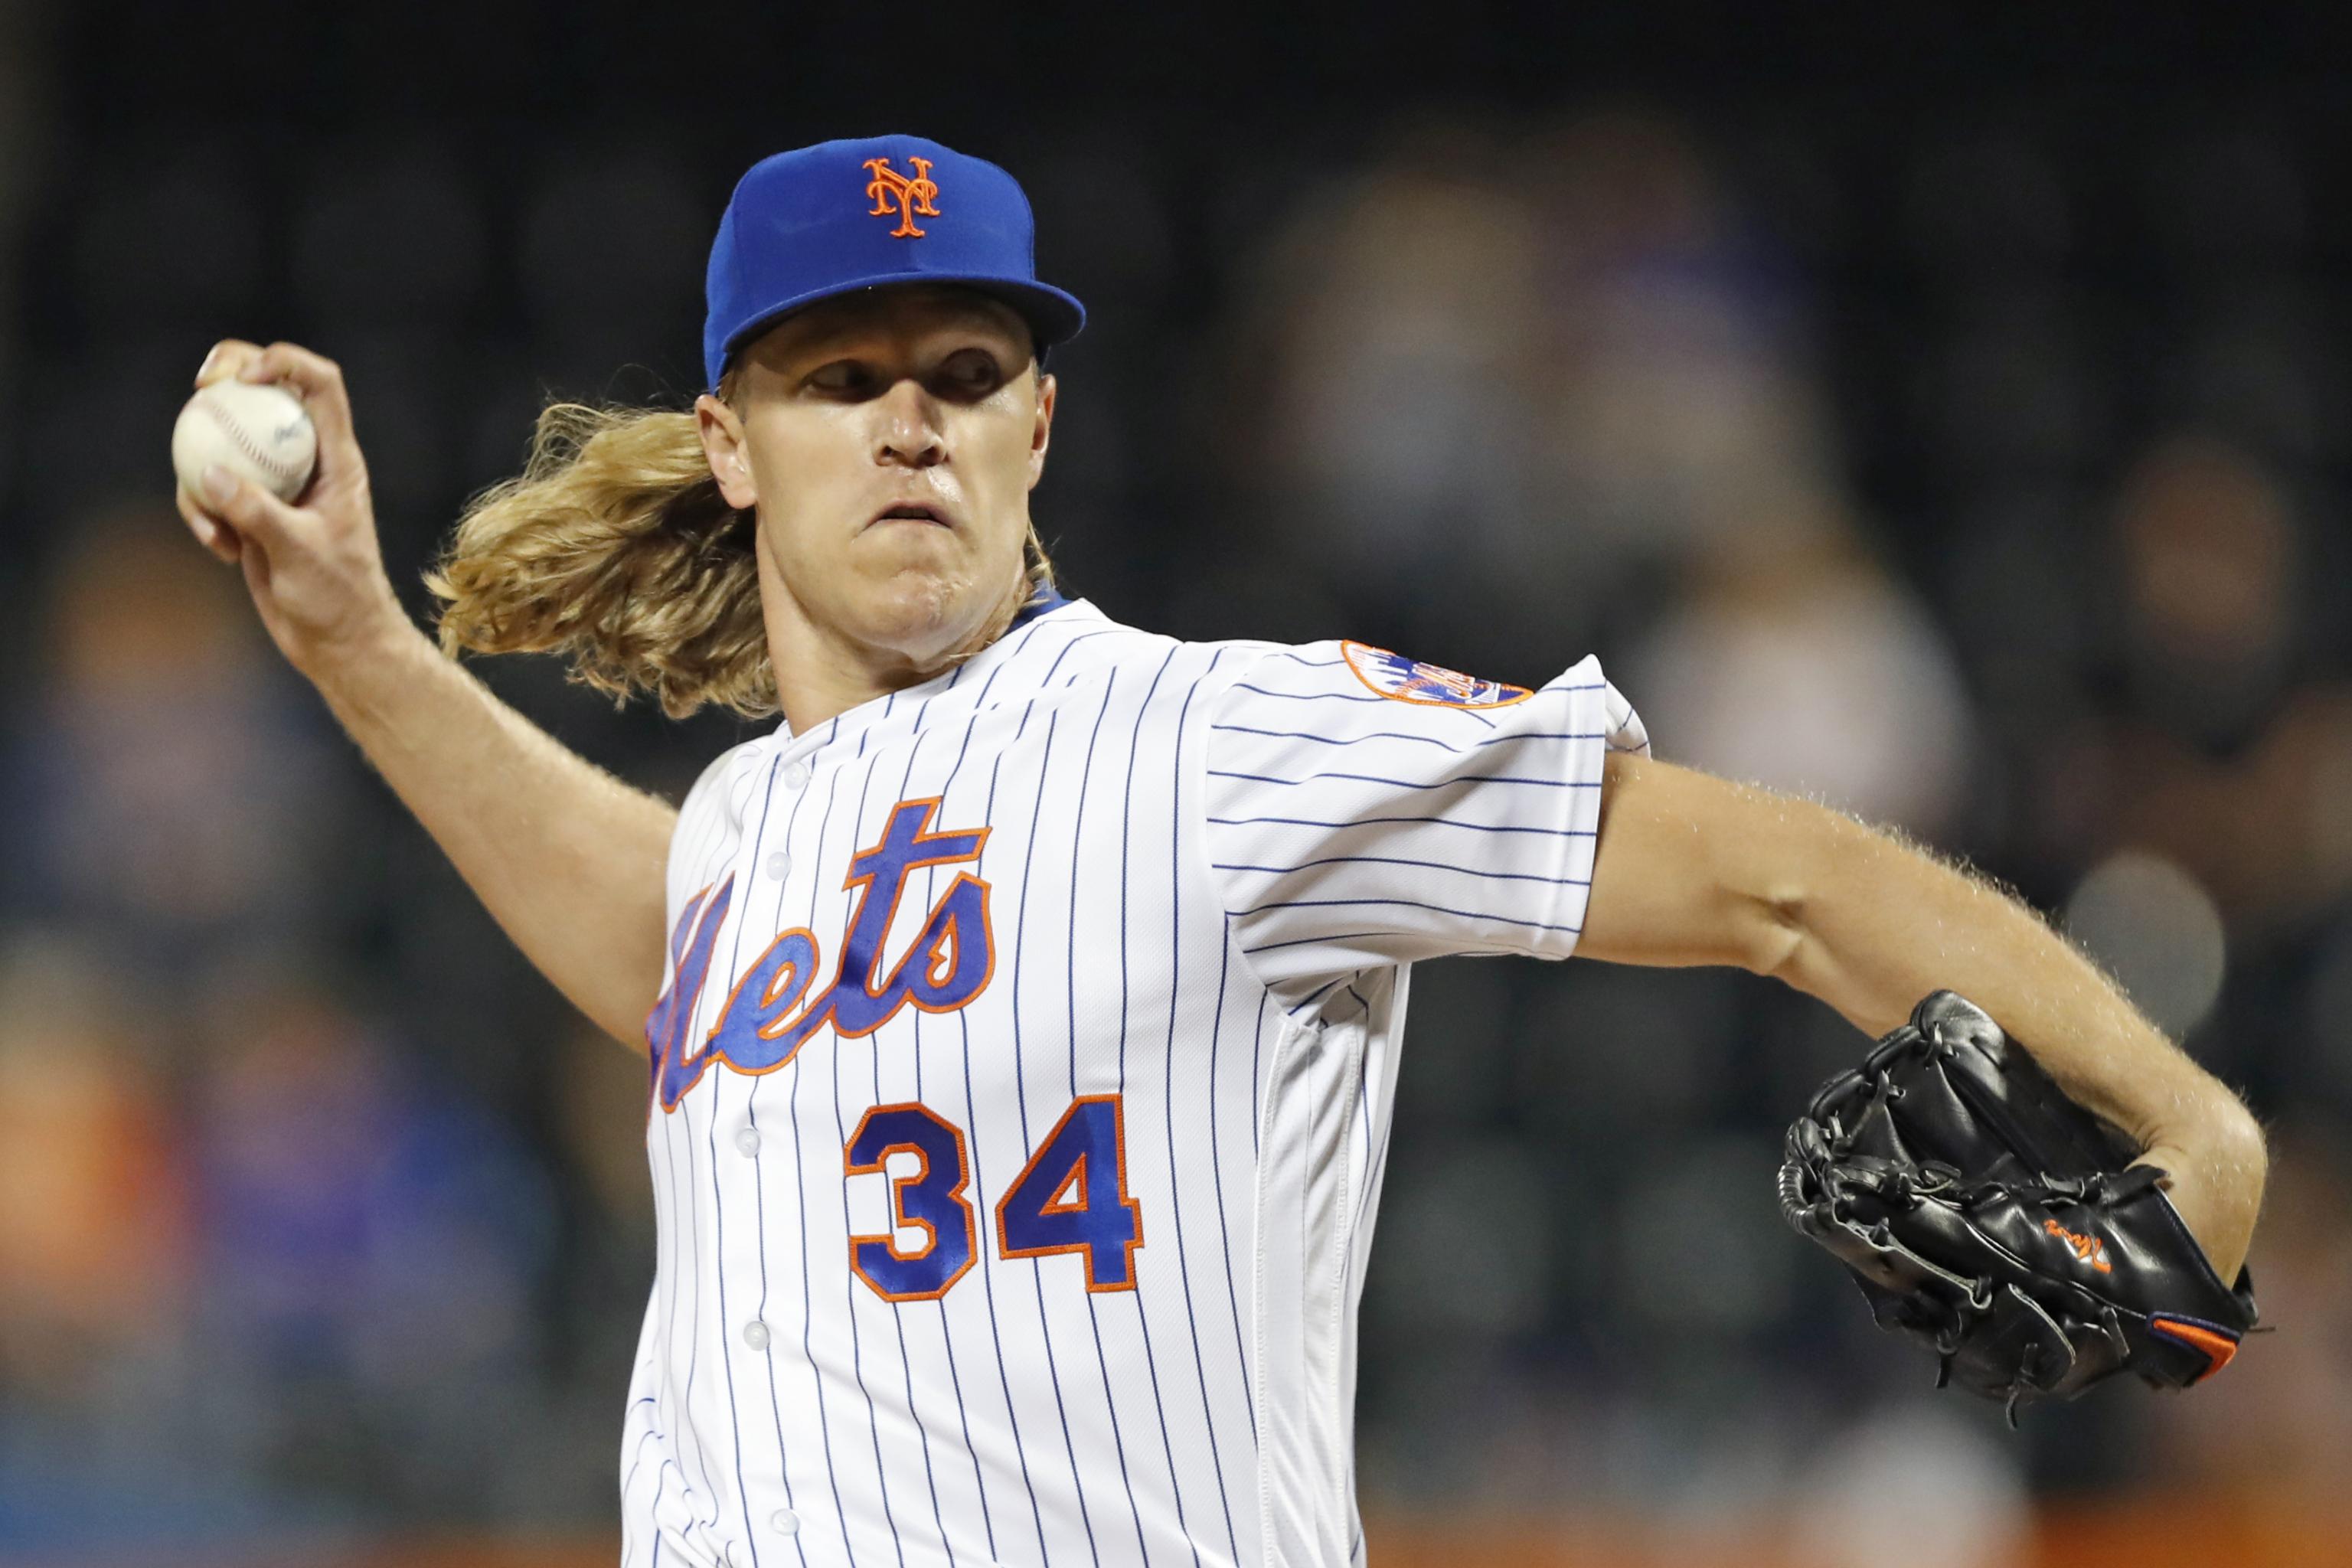 VIDEO: Mets Players Troll Noah Syndergaard by Working Out